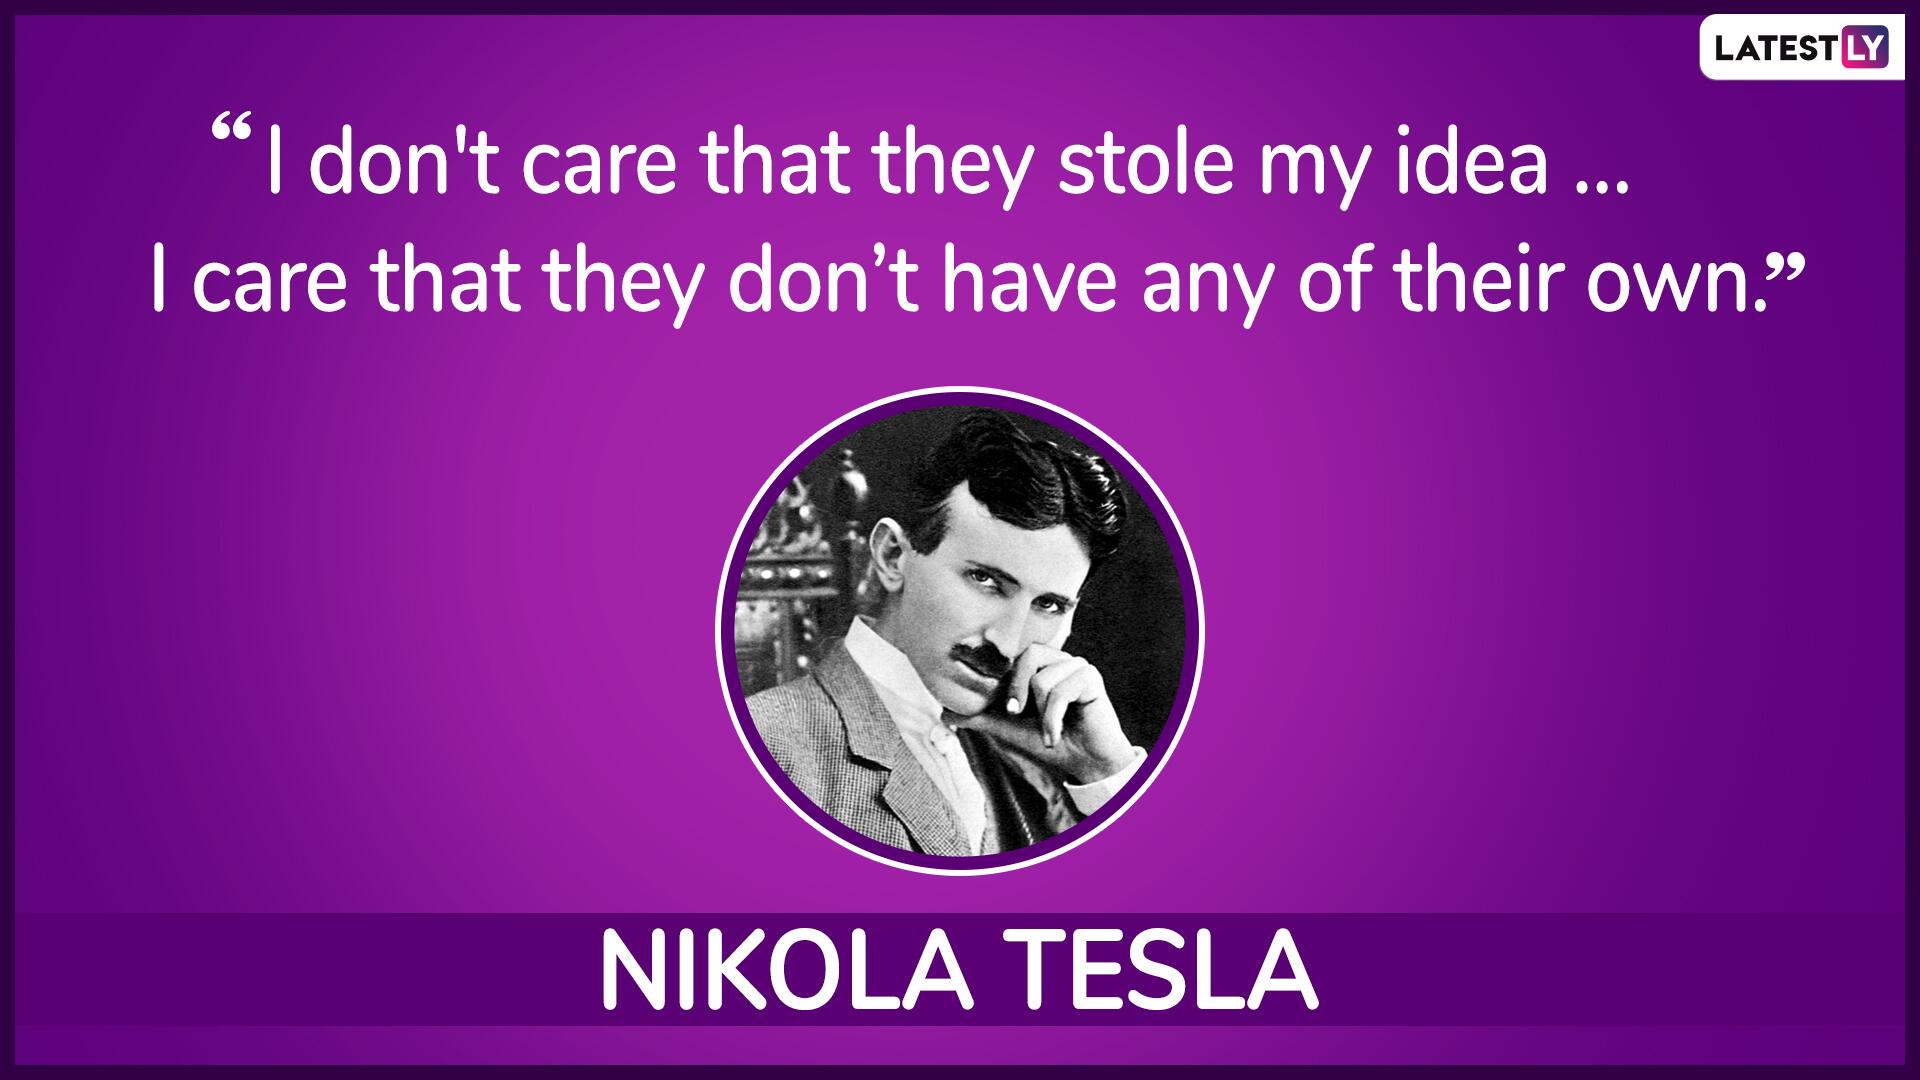 Nikola Tesla S 164th Birth Anniversary Here Are 5 Popular Quotes By The Futurist Inventor On Science Life And Inventions Latestly